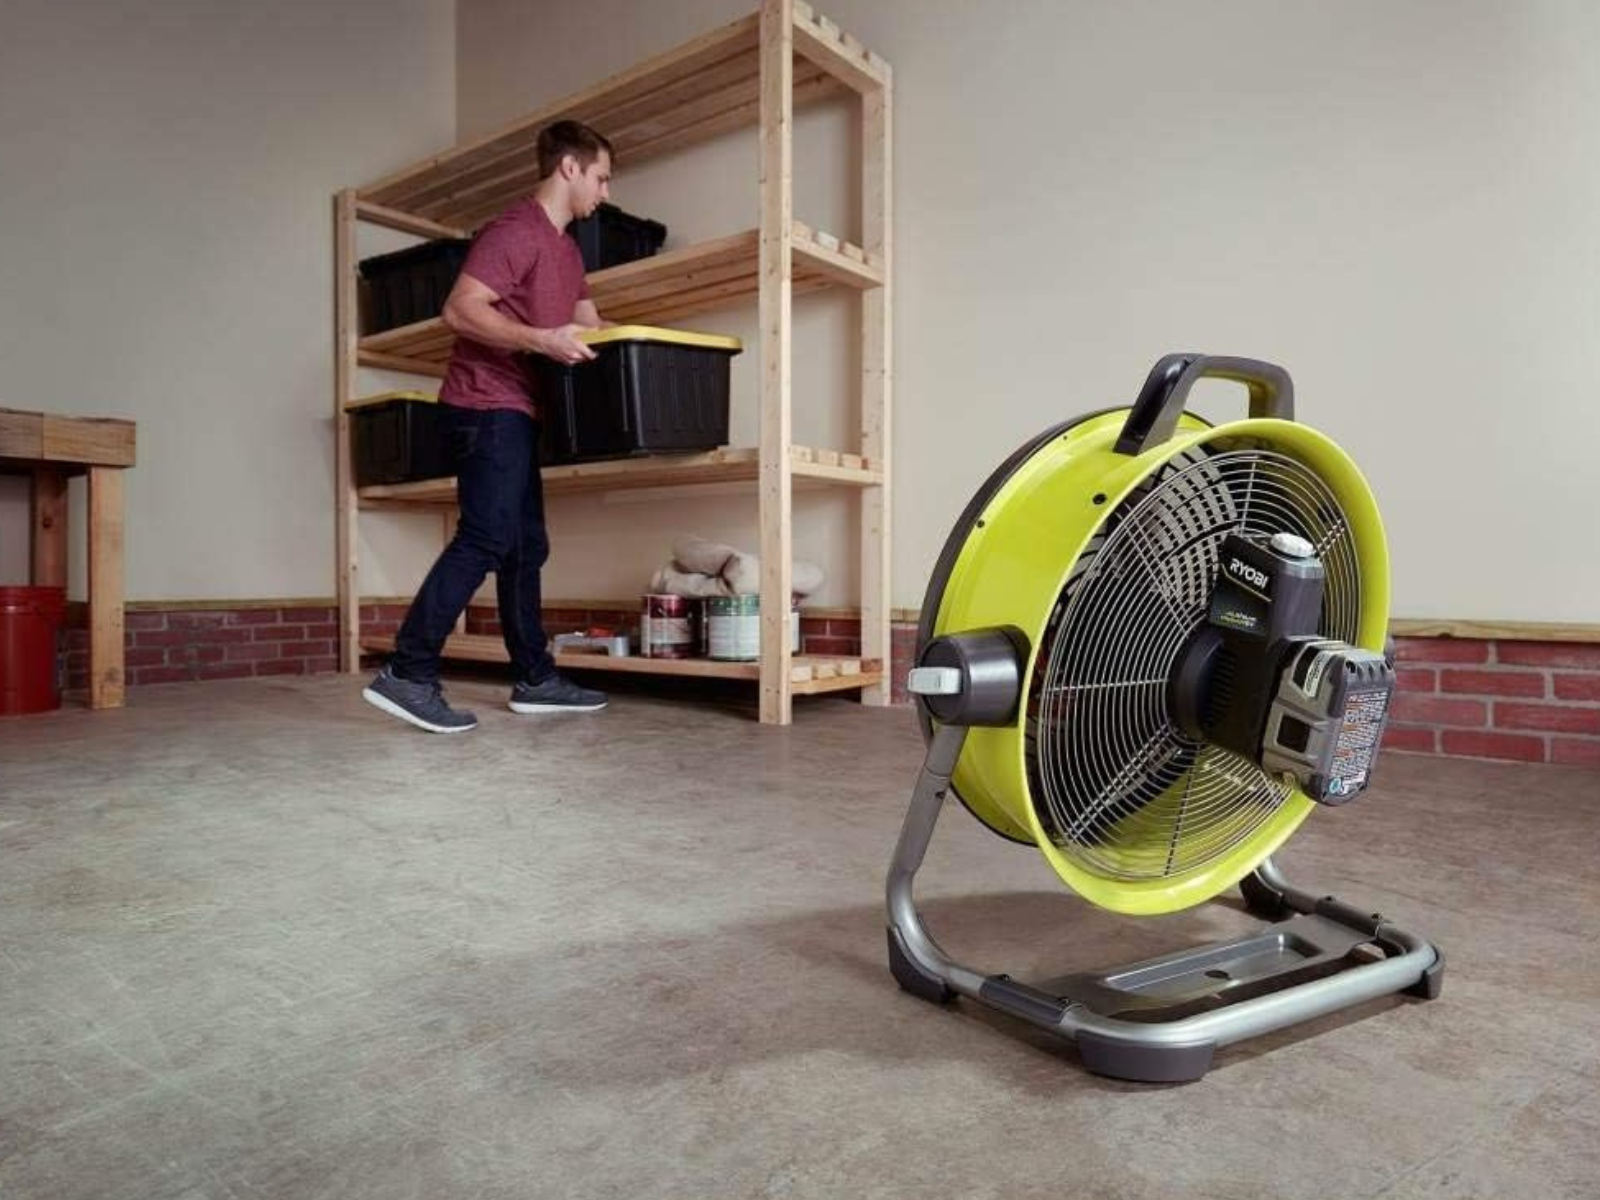 A cordless One+ fan cooling off the garage for a man working with Ryobi.